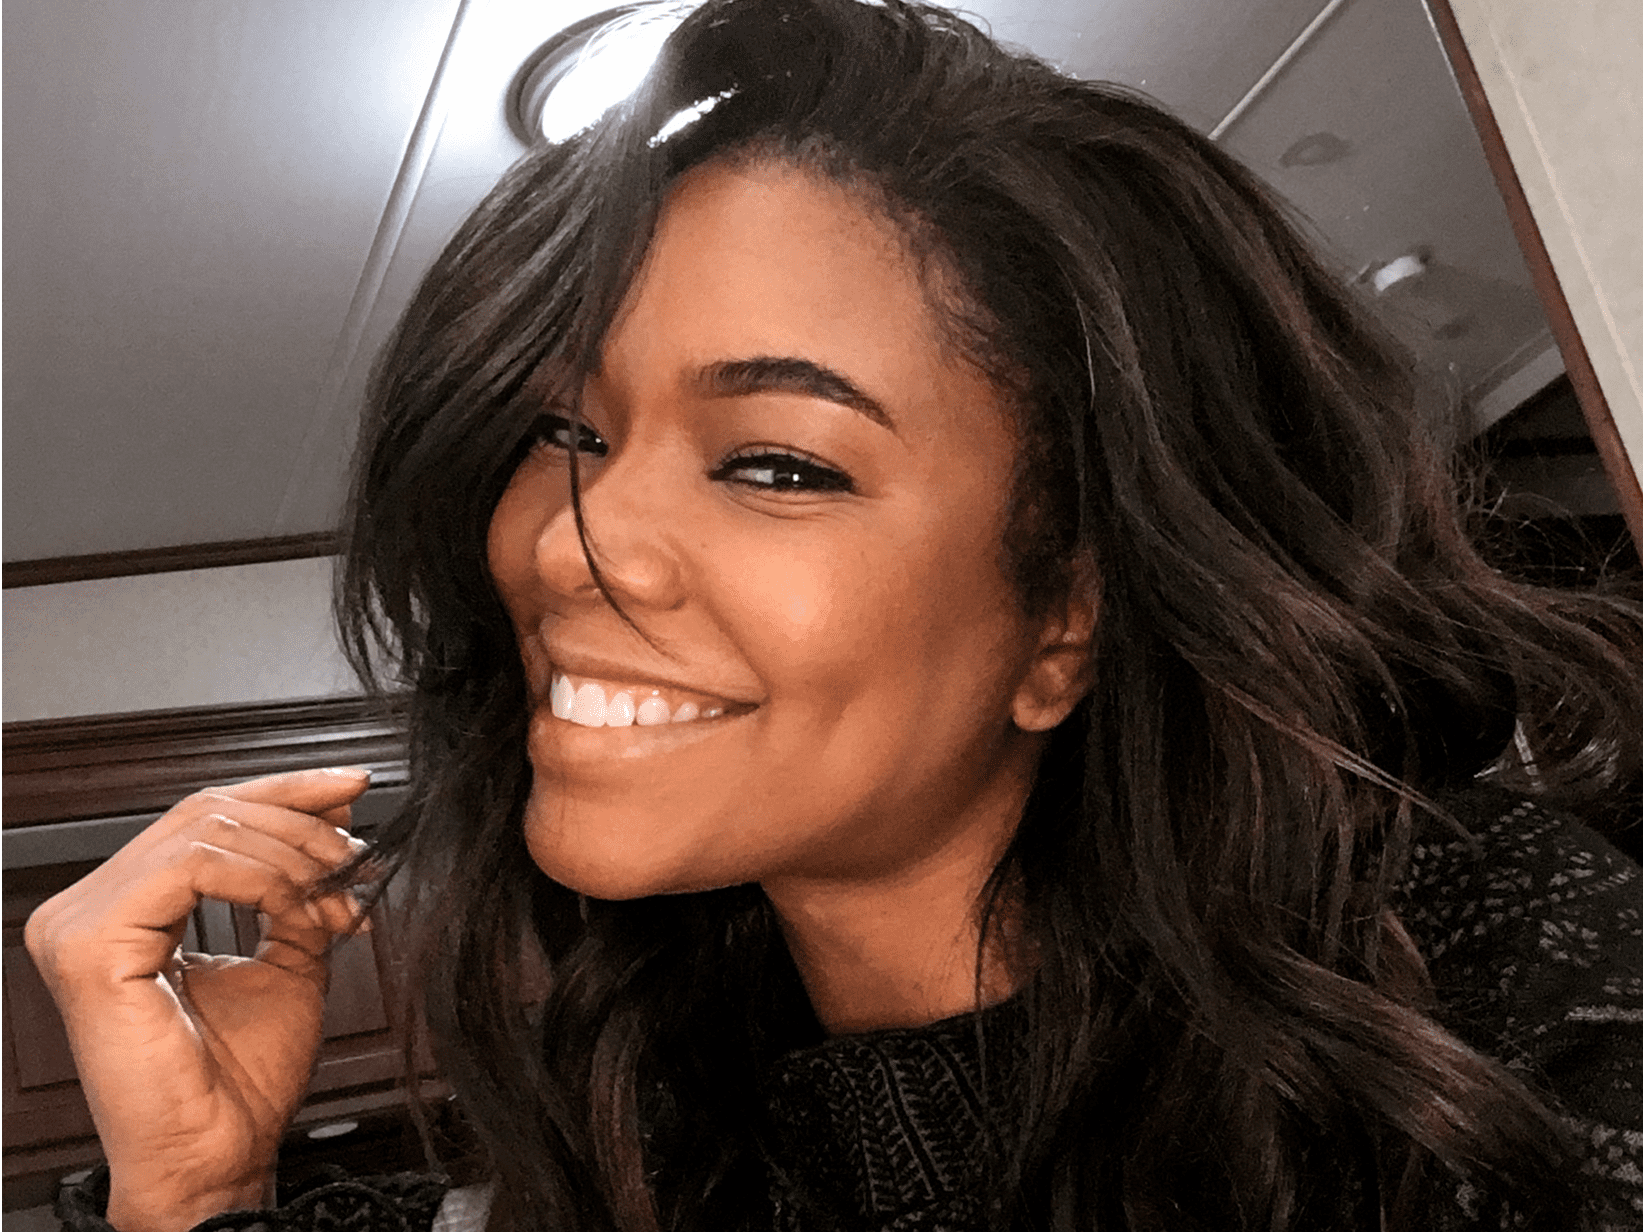 ”gabrielle-union-shares-video-featuring-her-baby-girl-kaavia-james”